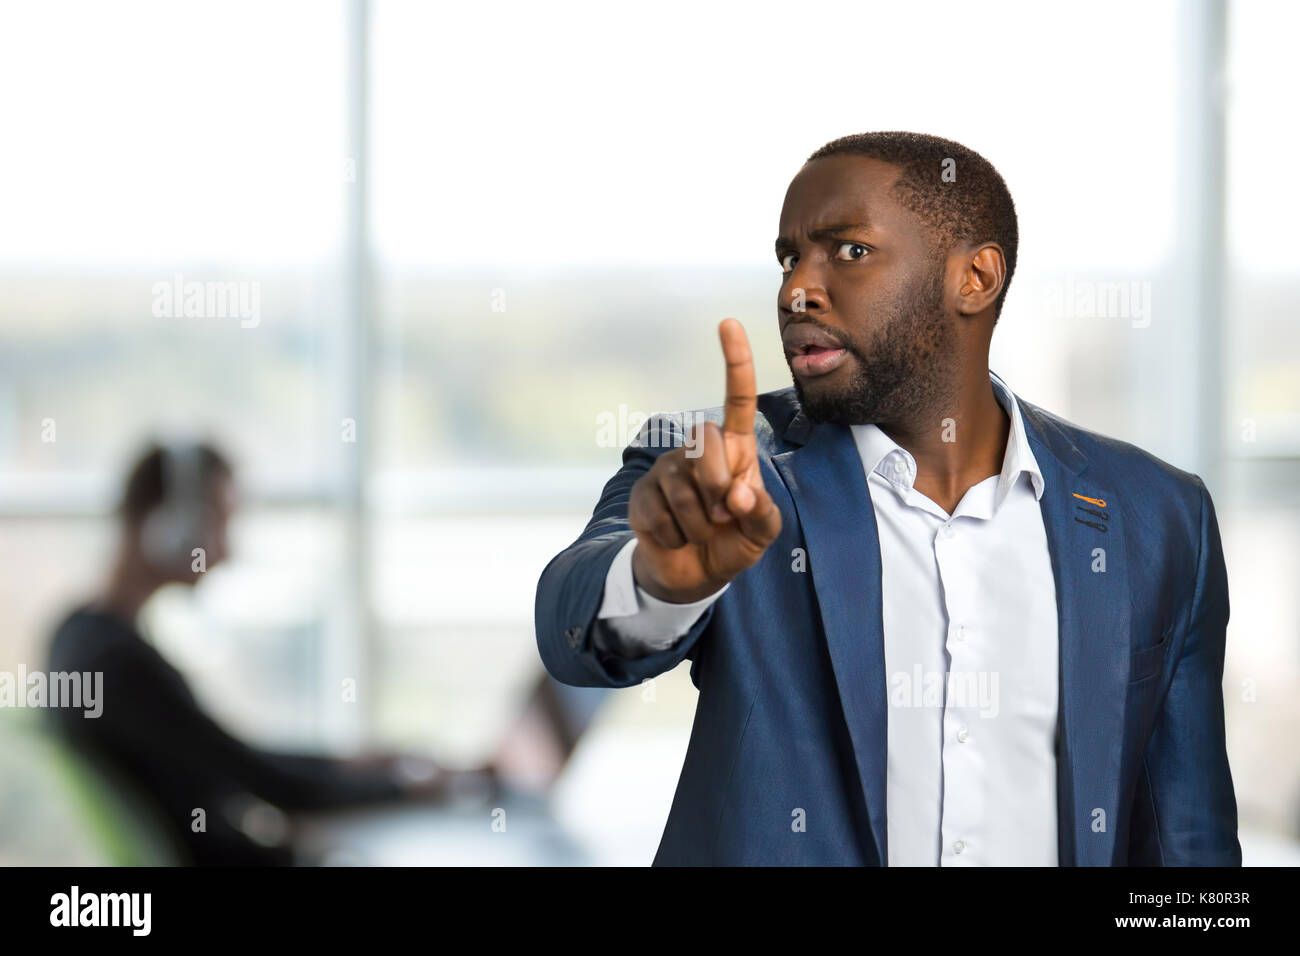 Businessman pointing his finger towards camera. Stock Photo